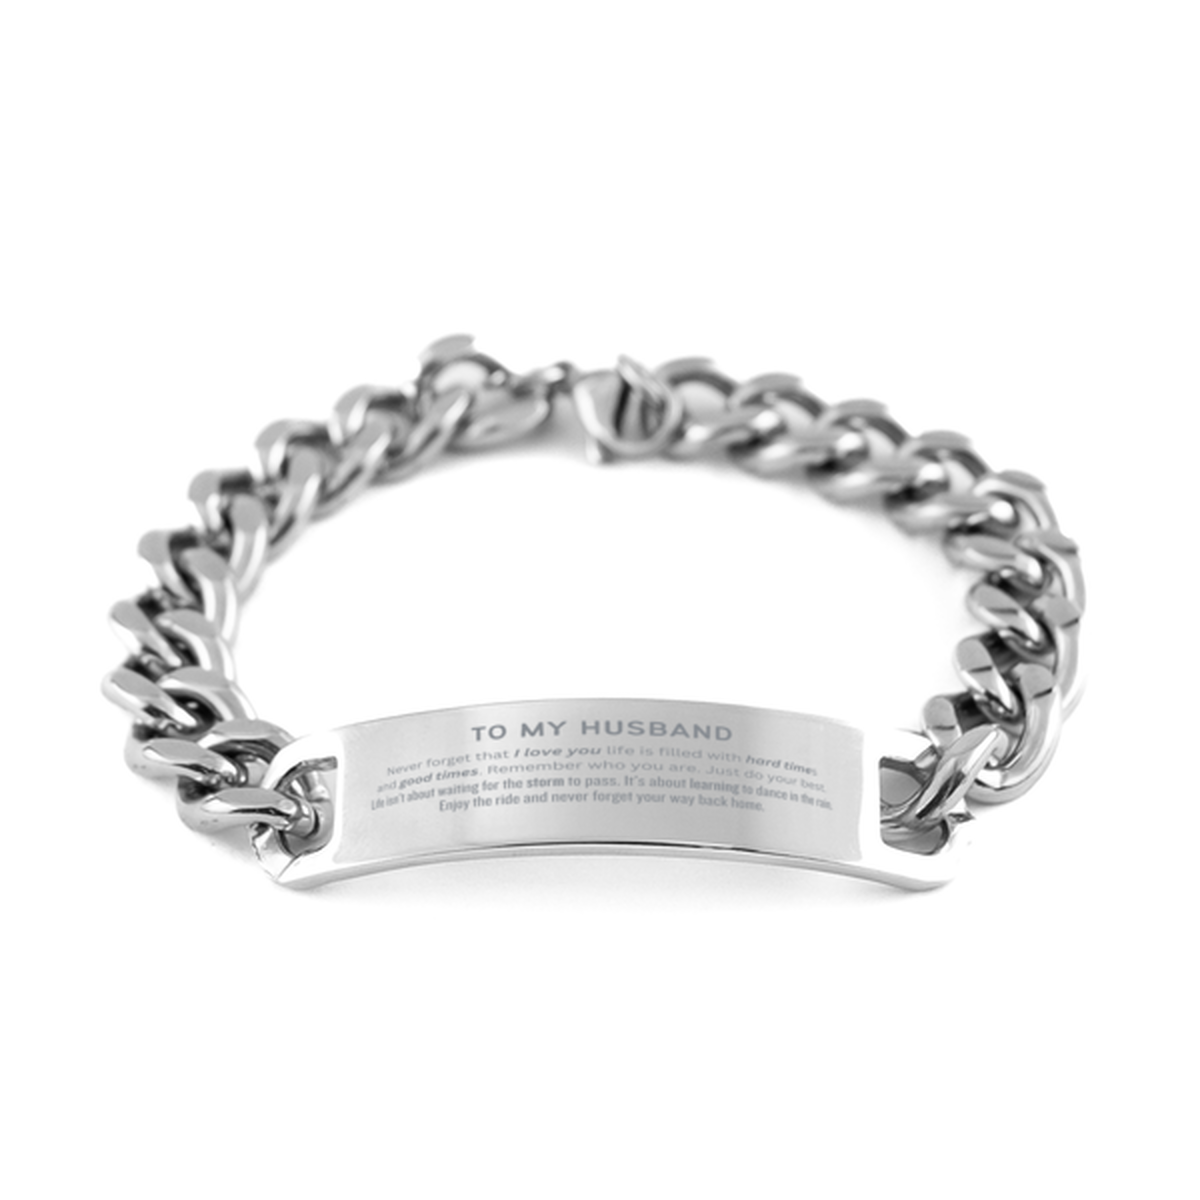 Christmas Husband Cuban Chain Stainless Steel Bracelet Gifts, To My Husband Birthday Thank You Gifts For Husband, Graduation Unique Gifts For Husband To My Husband Never forget that I love you life is filled with hard times and good times. Remember who yo